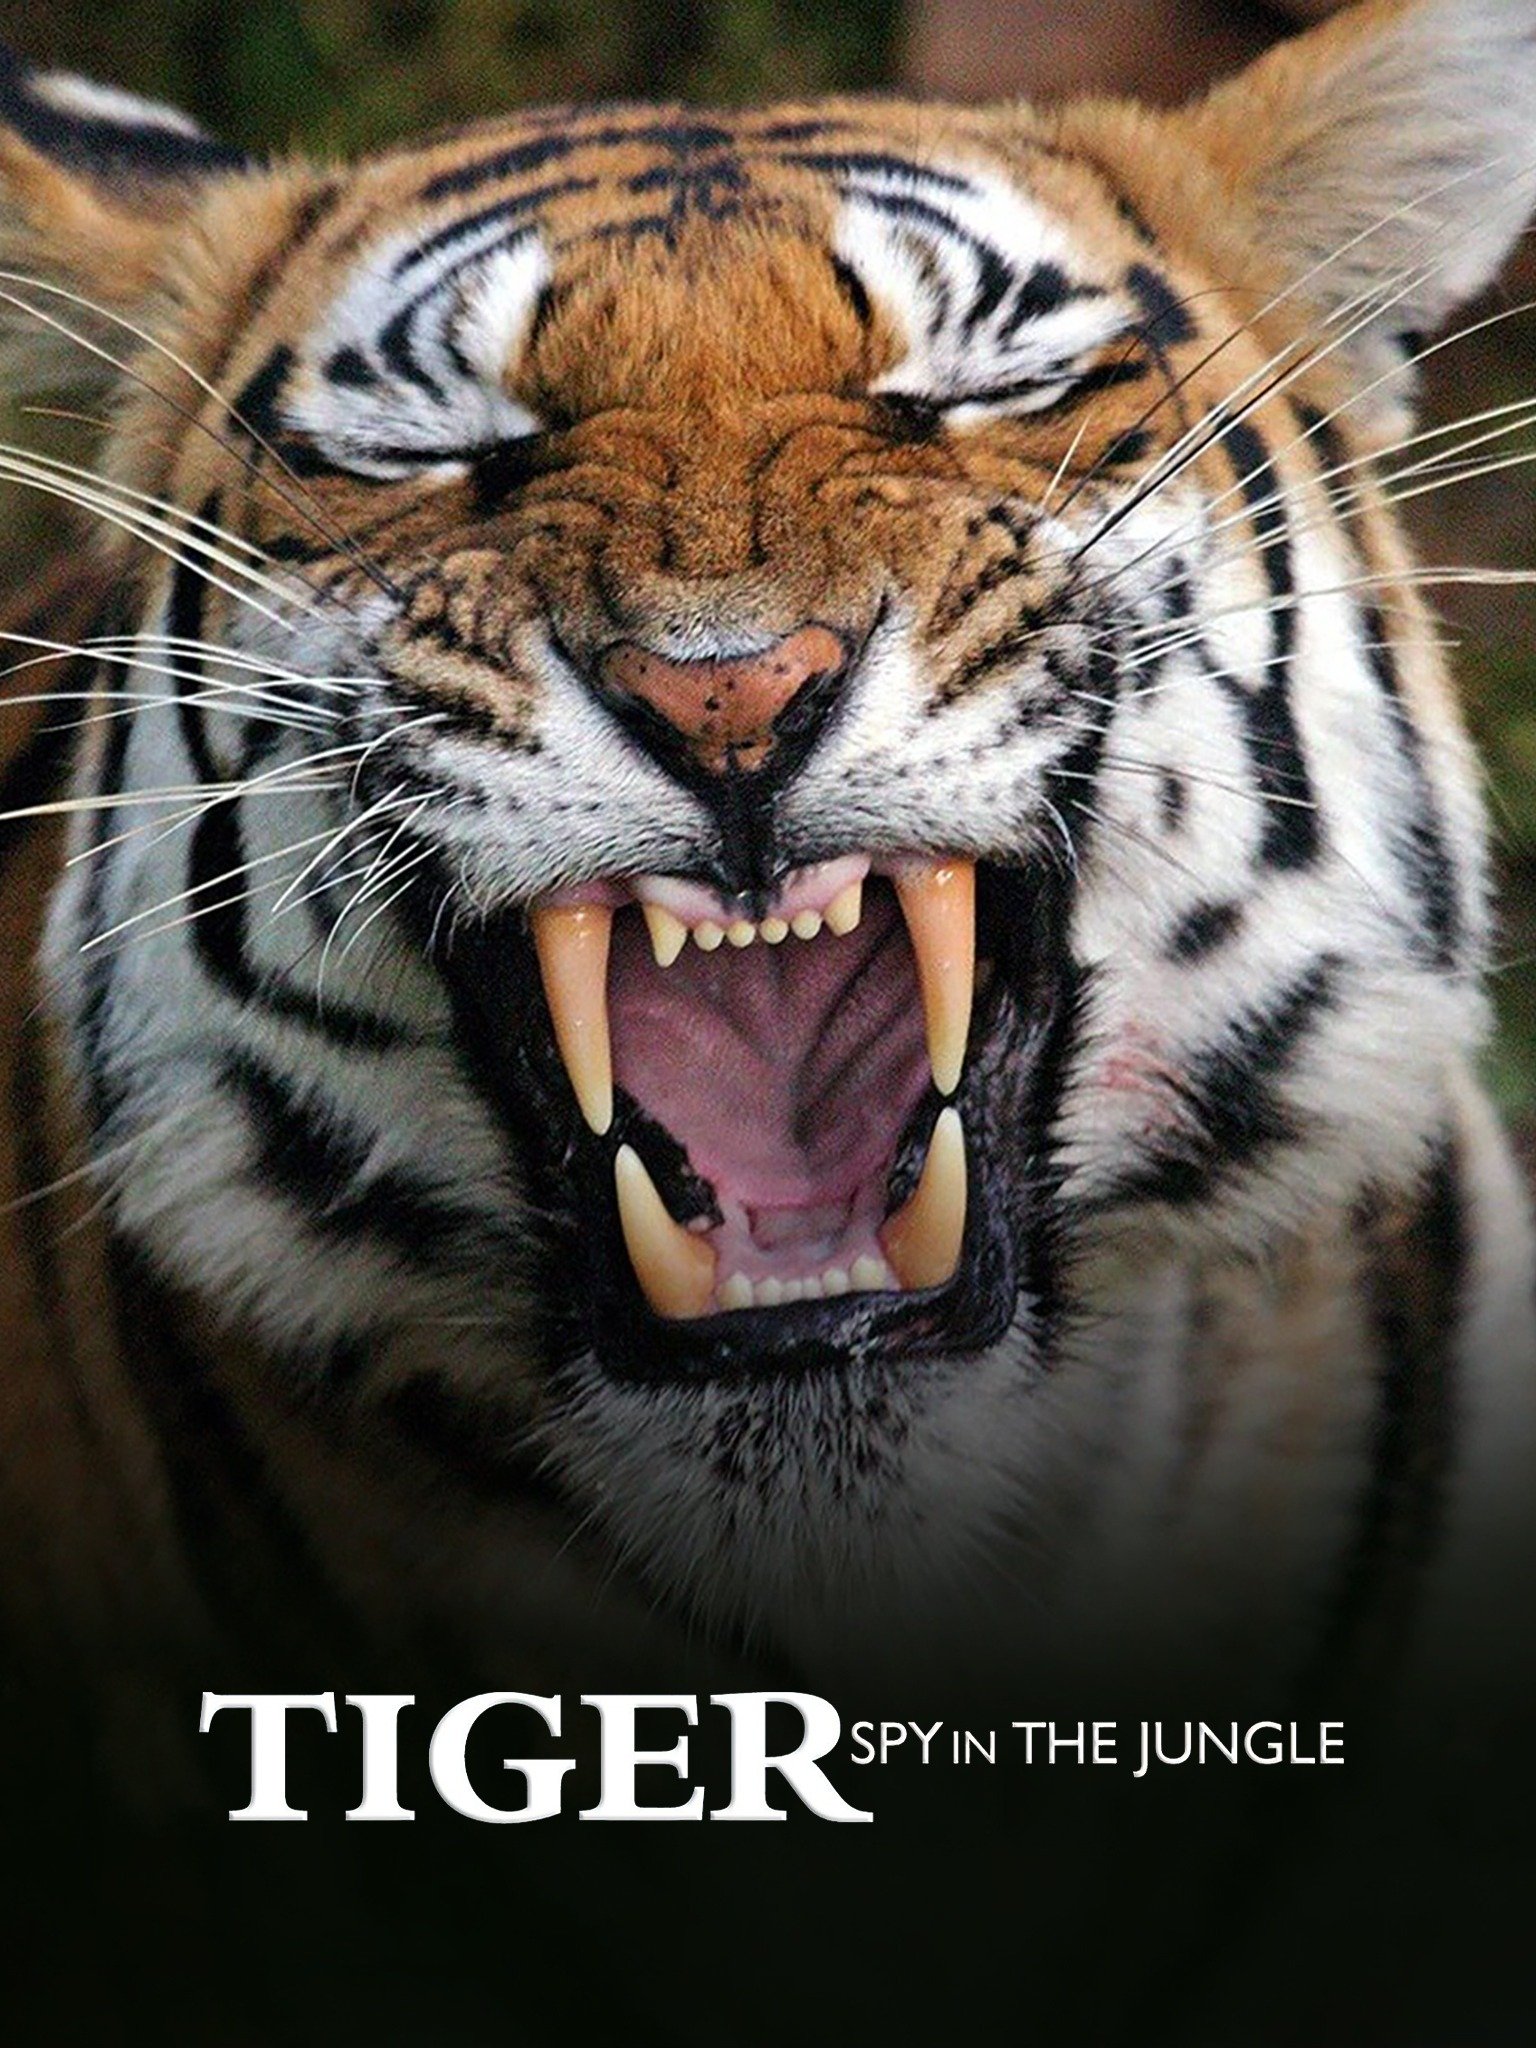 Tiger: Spy in the Jungle - Rotten Tomatoes